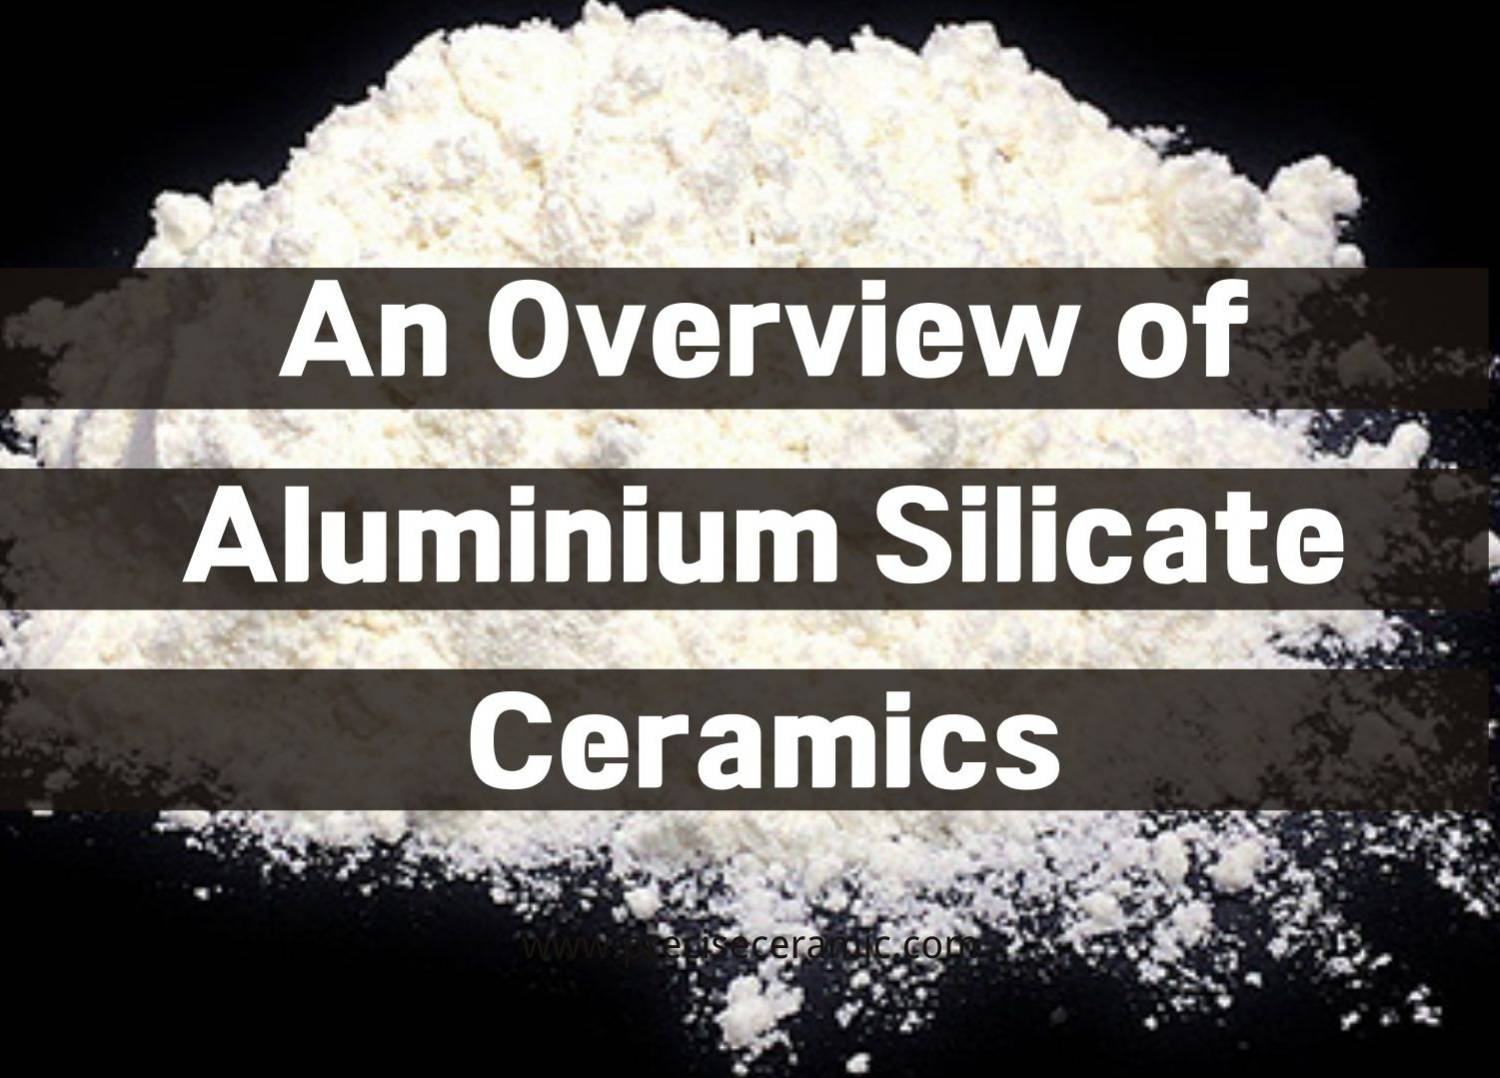 INTRODUCTION TO ALUMINIUM AND ITS PROPERTIES